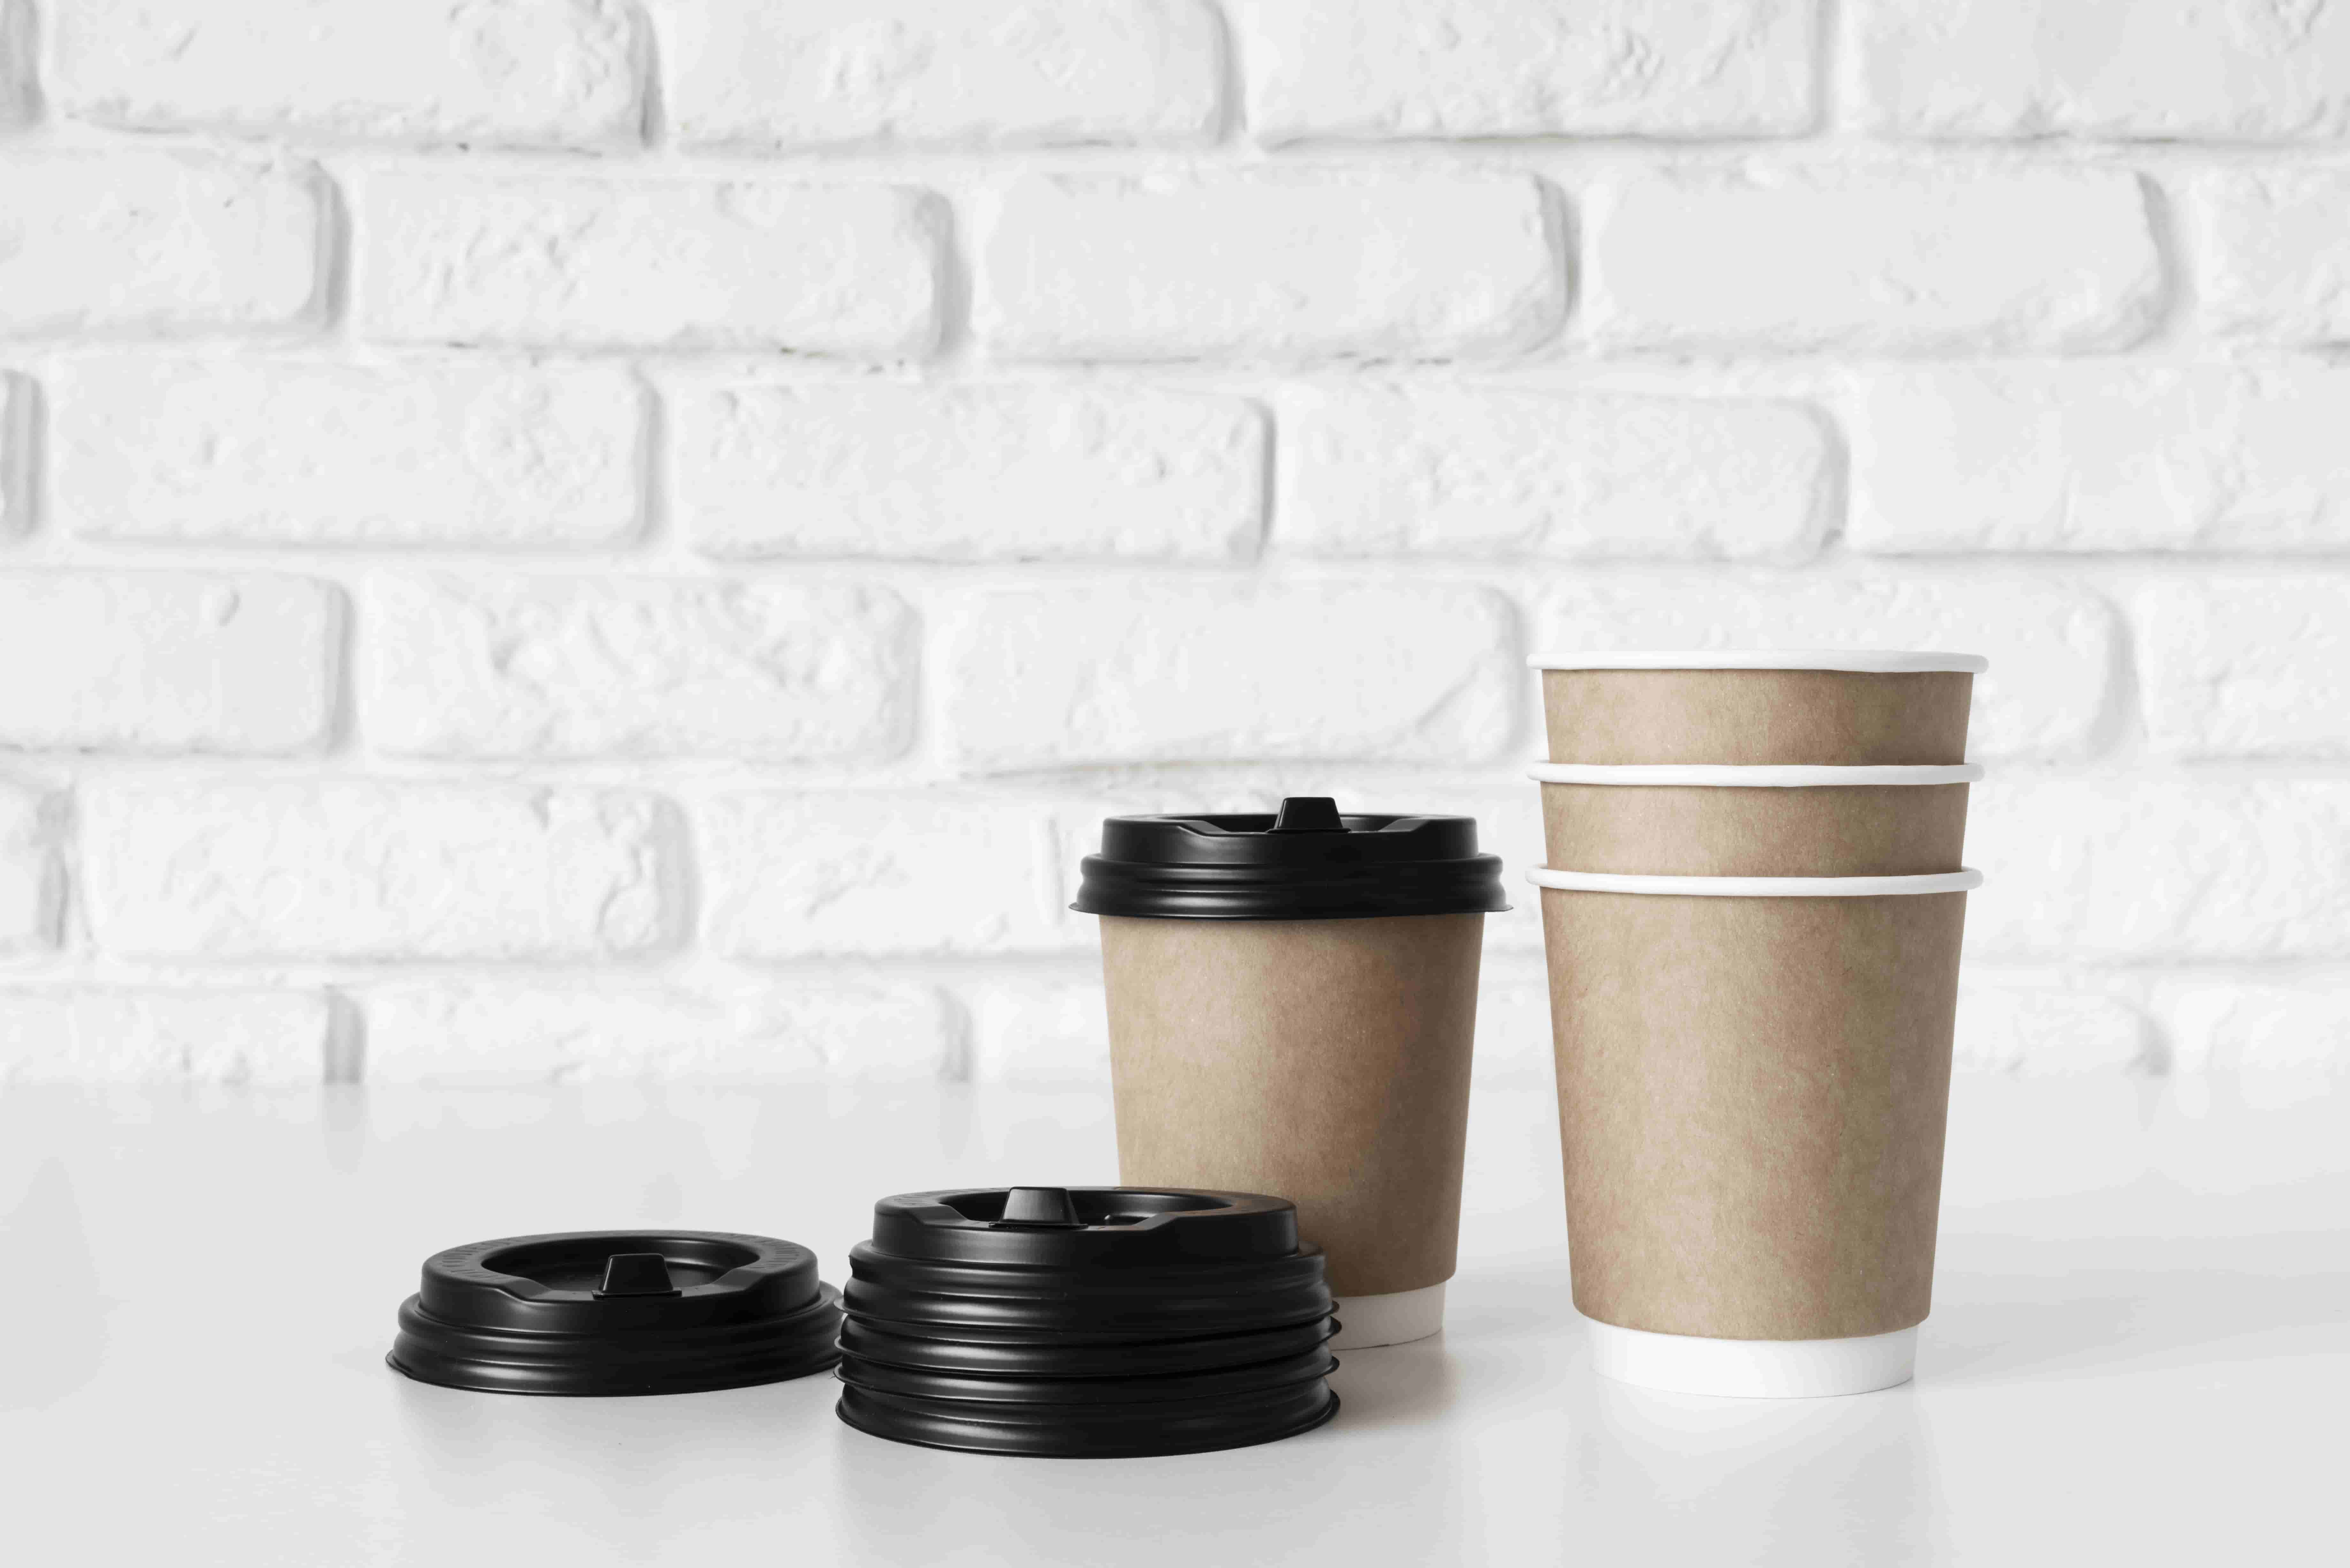 https://www.tuobopackaging.com/disposable-coffee-caps-with-lids-custom/